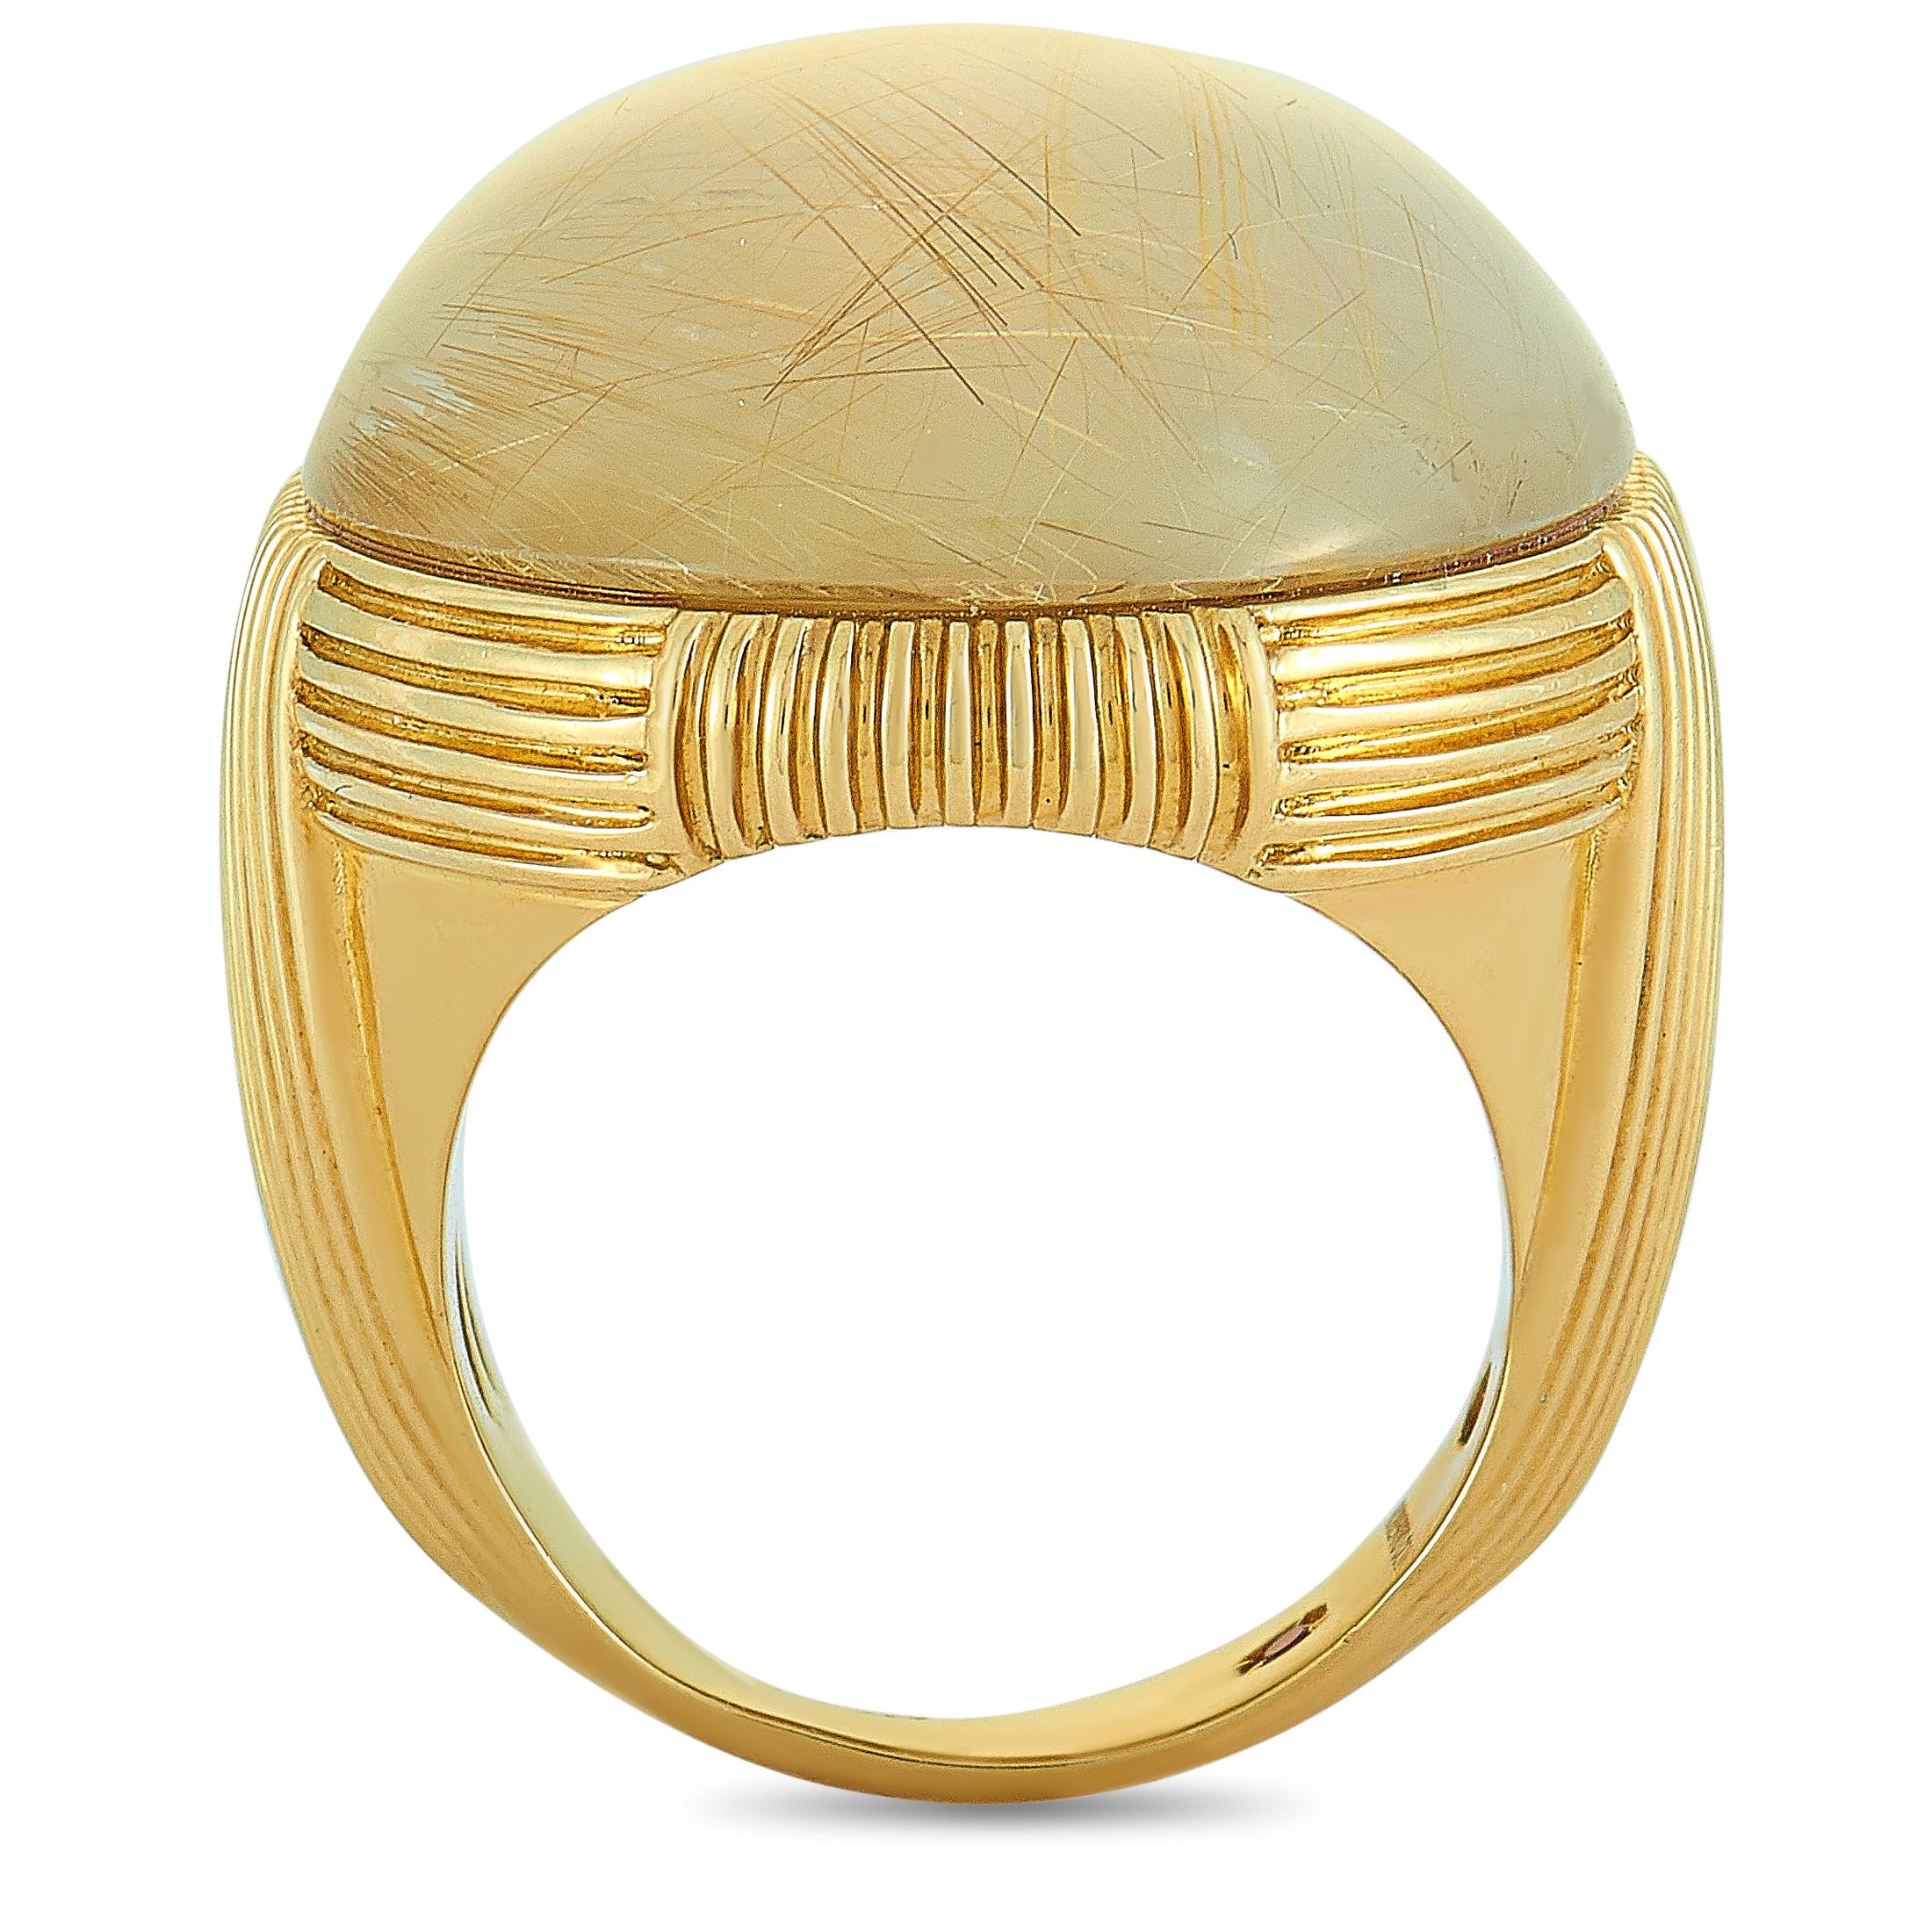 This Roberto Coin ring is crafted from 18K yellow gold and set with a rutilated mother of pearl. The ring weighs 27.5 grams, boasting band thickness of 4 mm and top height of 12 mm, while top dimensions measure 24 by 30 mm.
Ring Size: 7

Offered in